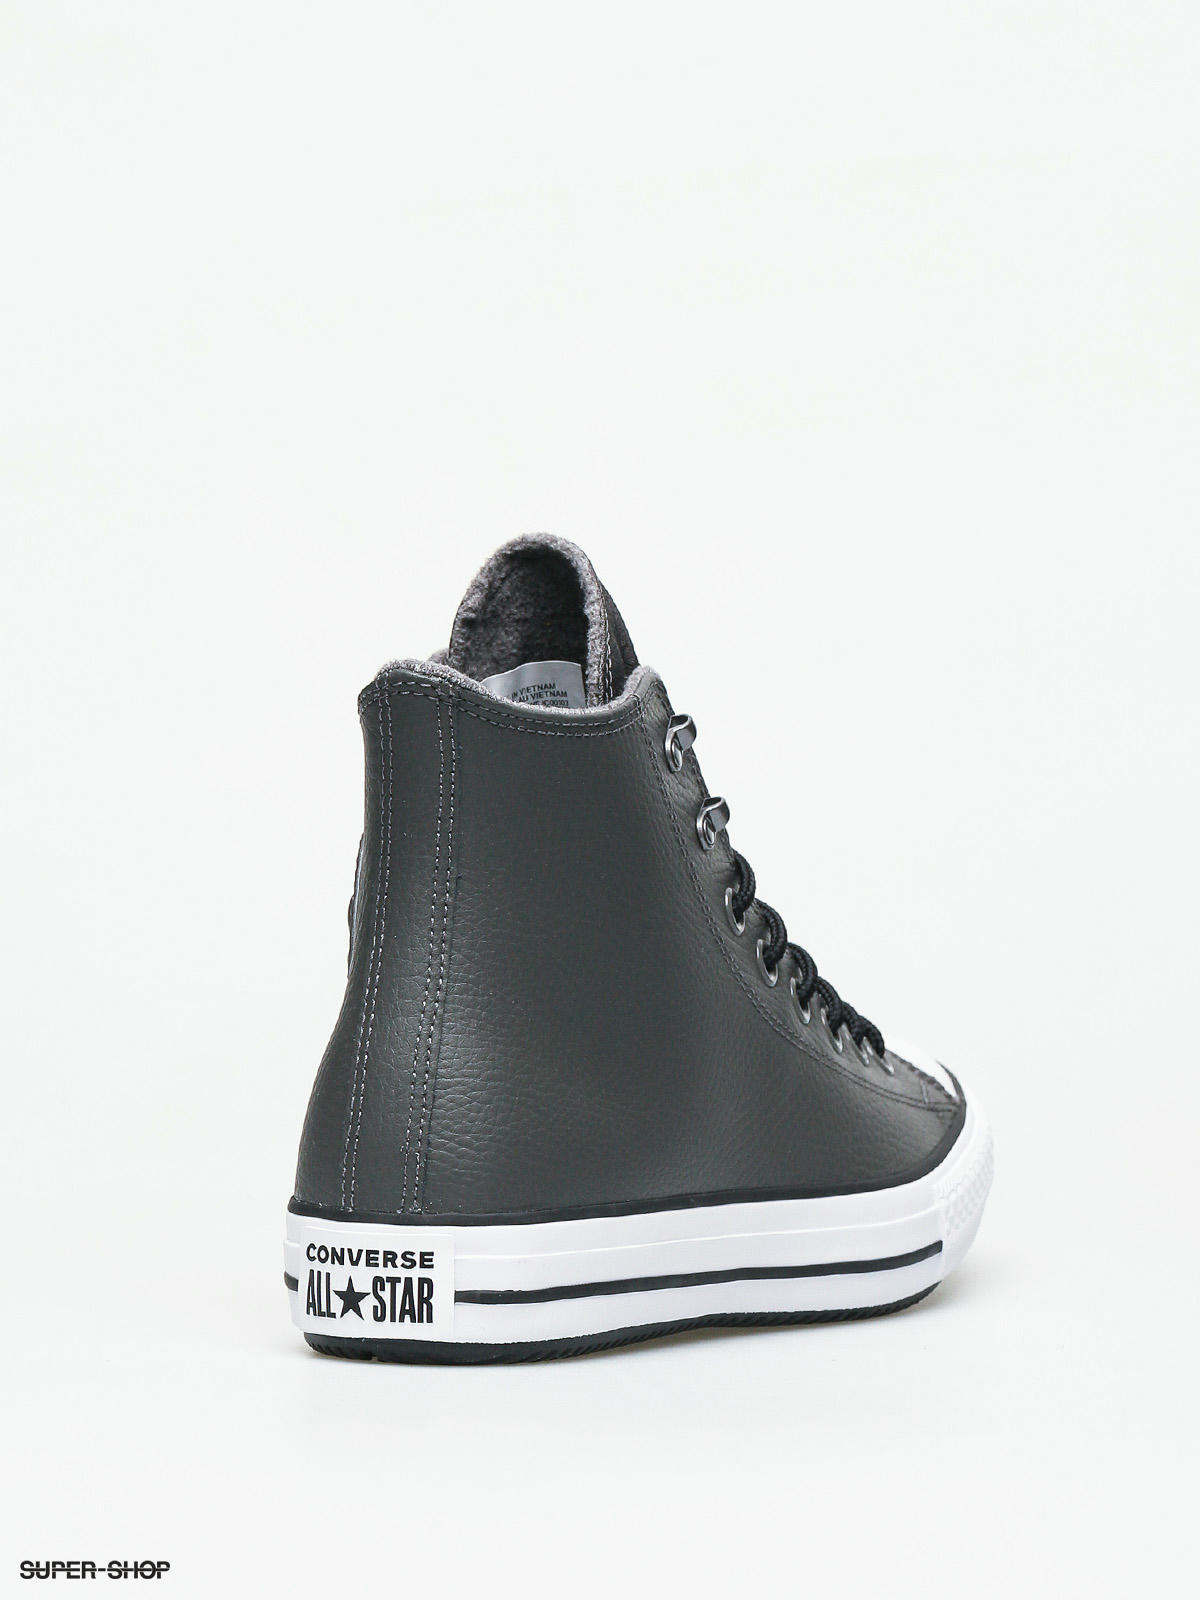 converse all star all black leather